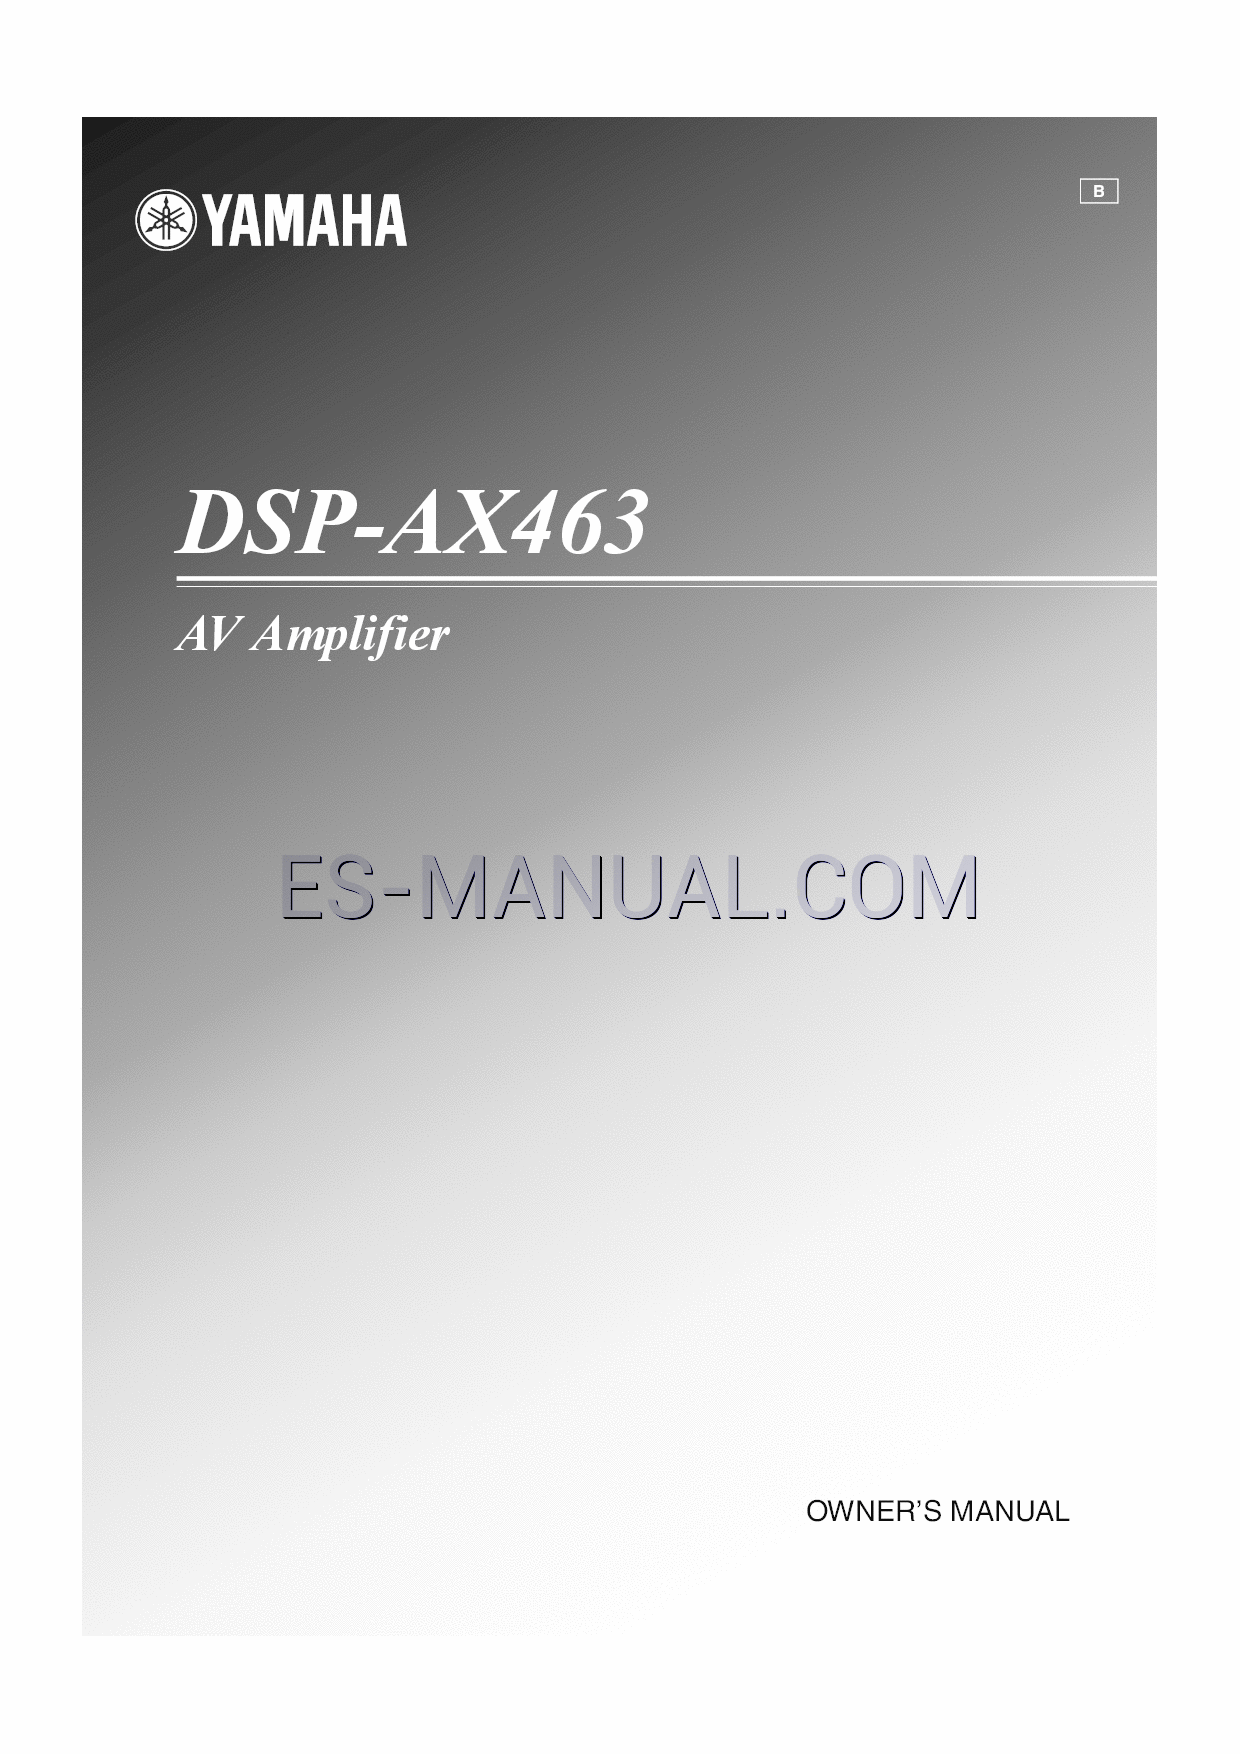 Read online Owner's Manual for Yamaha DSP-AX463 (Page 1)